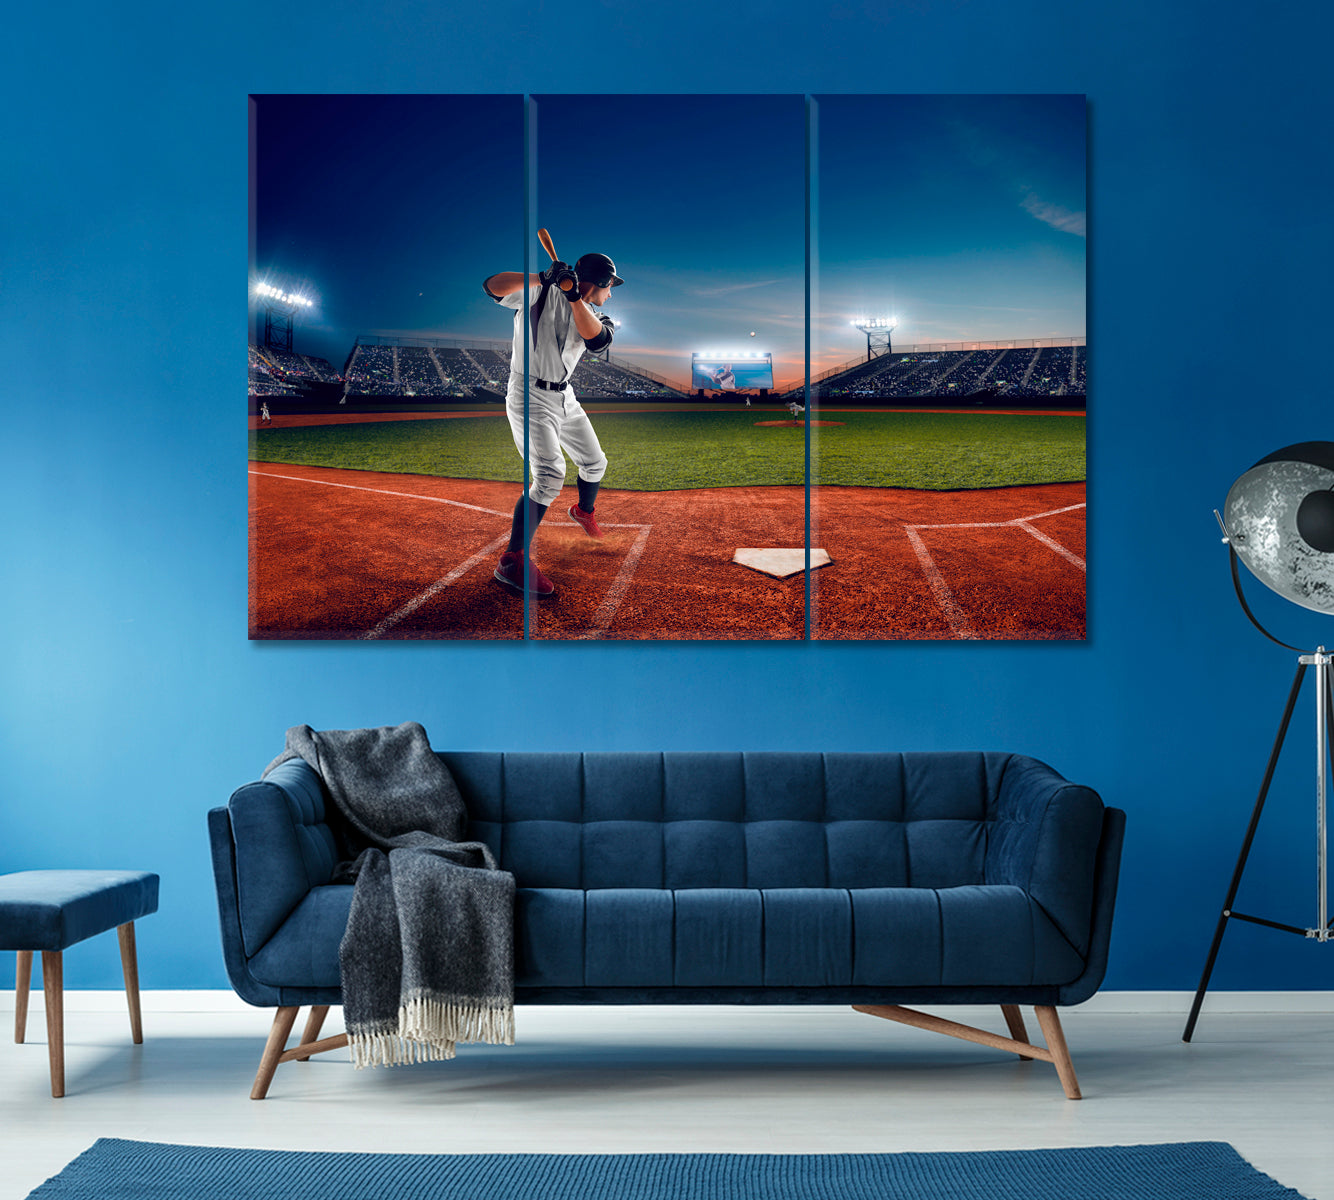 Baseball Player During Game Canvas Print ArtLexy 3 Panels 36"x24" inches 